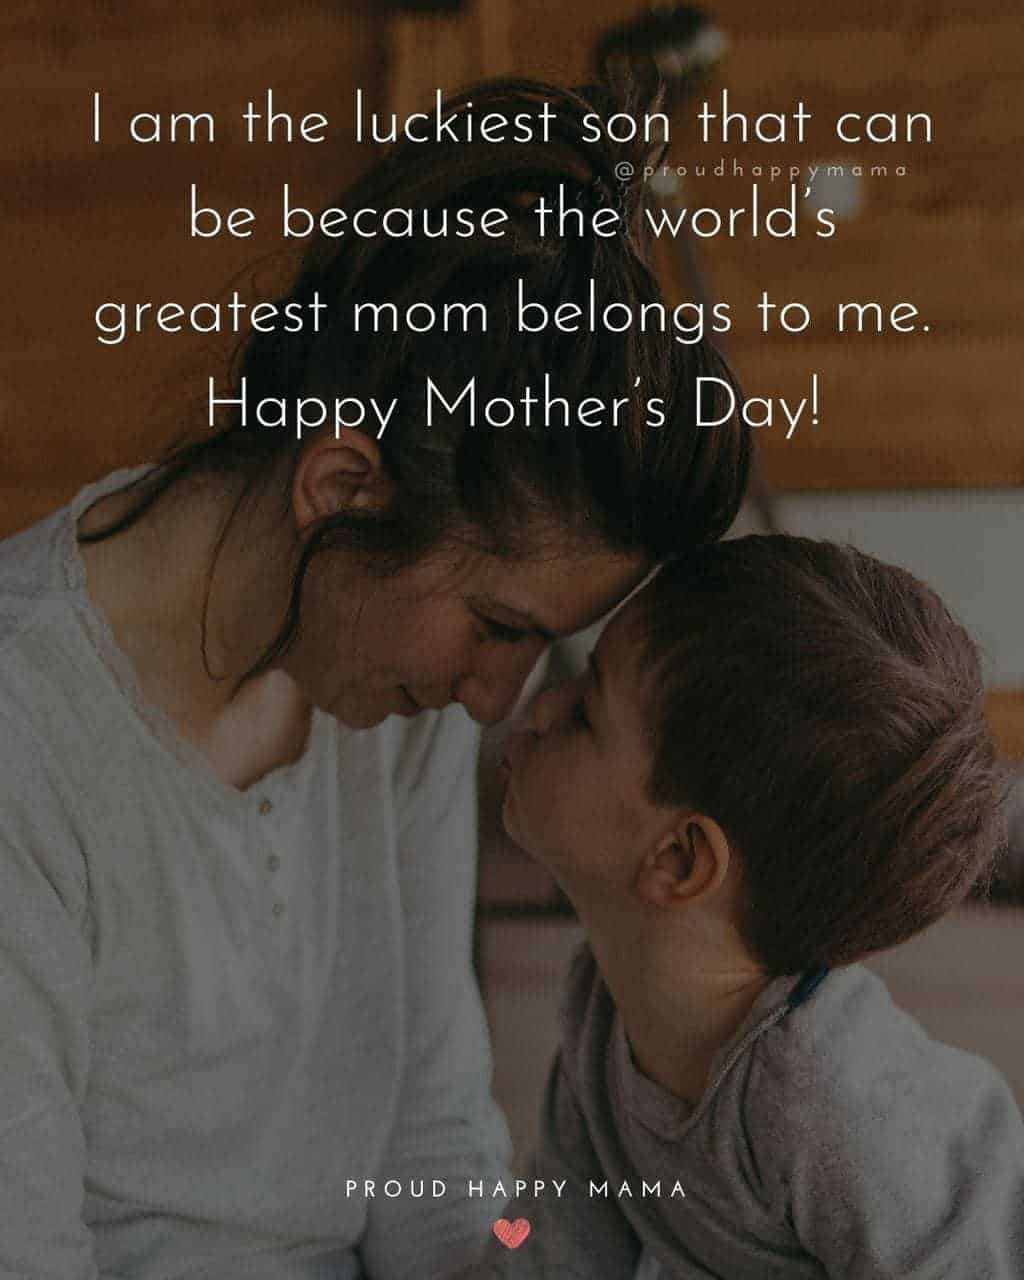 Happy Mothers Day Quotes From Son - I am the luckiest son that can be because the world’s greatest mom belongs to me. Happy